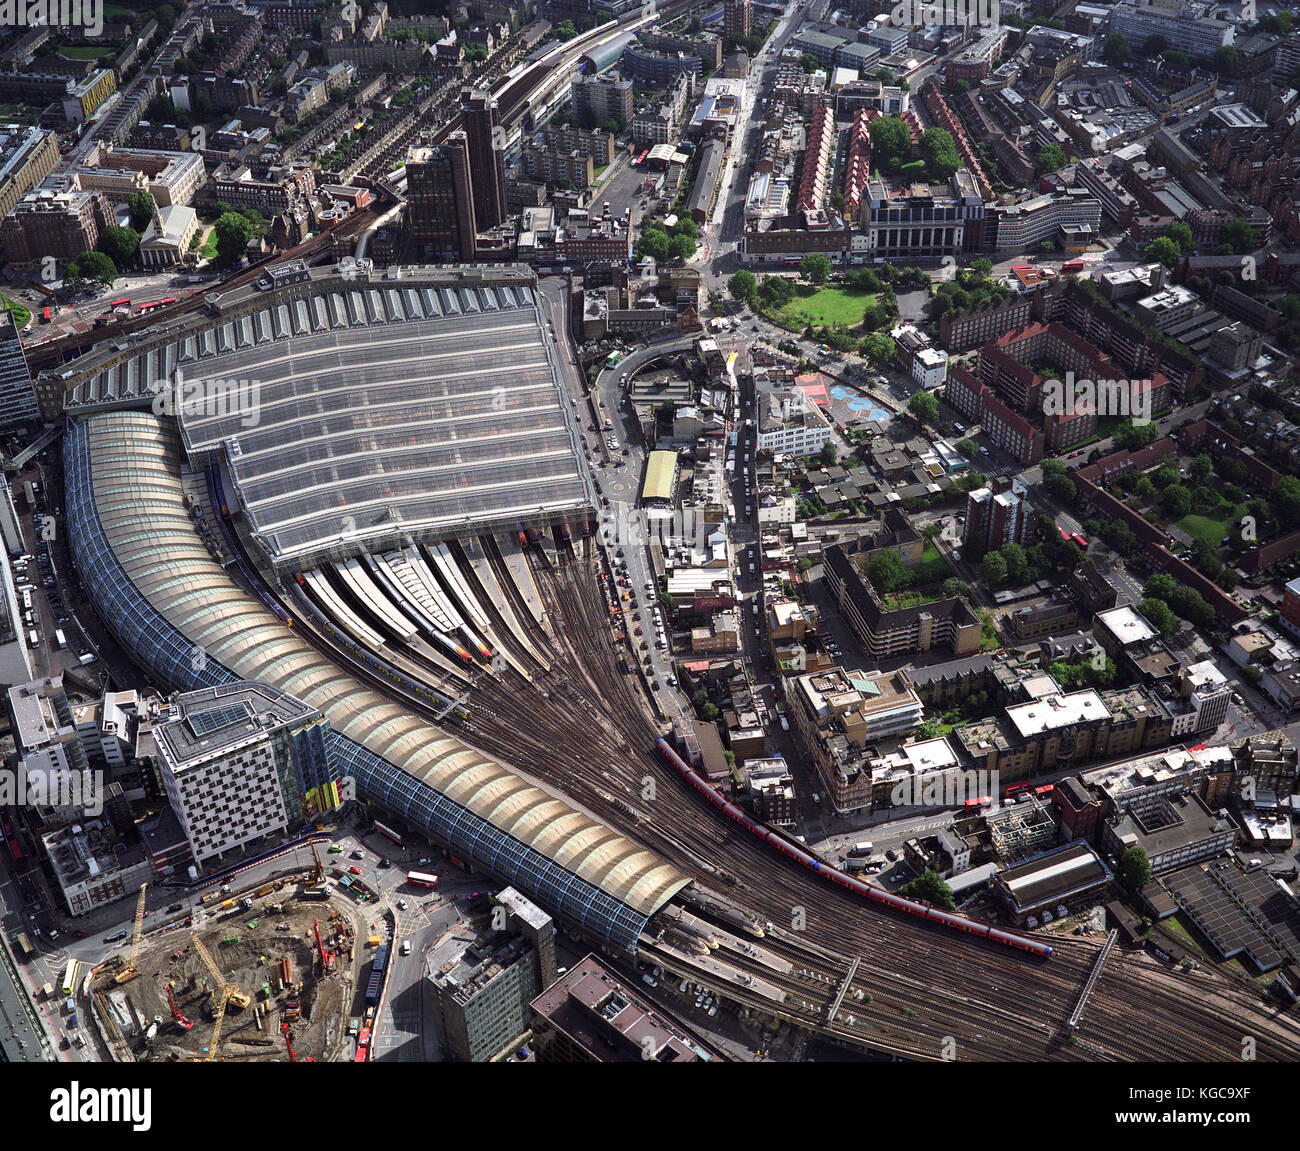 An aerial view of London showing Waterloo International Railway Station. On November 13 2007, the last Eurostar trains will operate from Waterloo befo Stock Photo